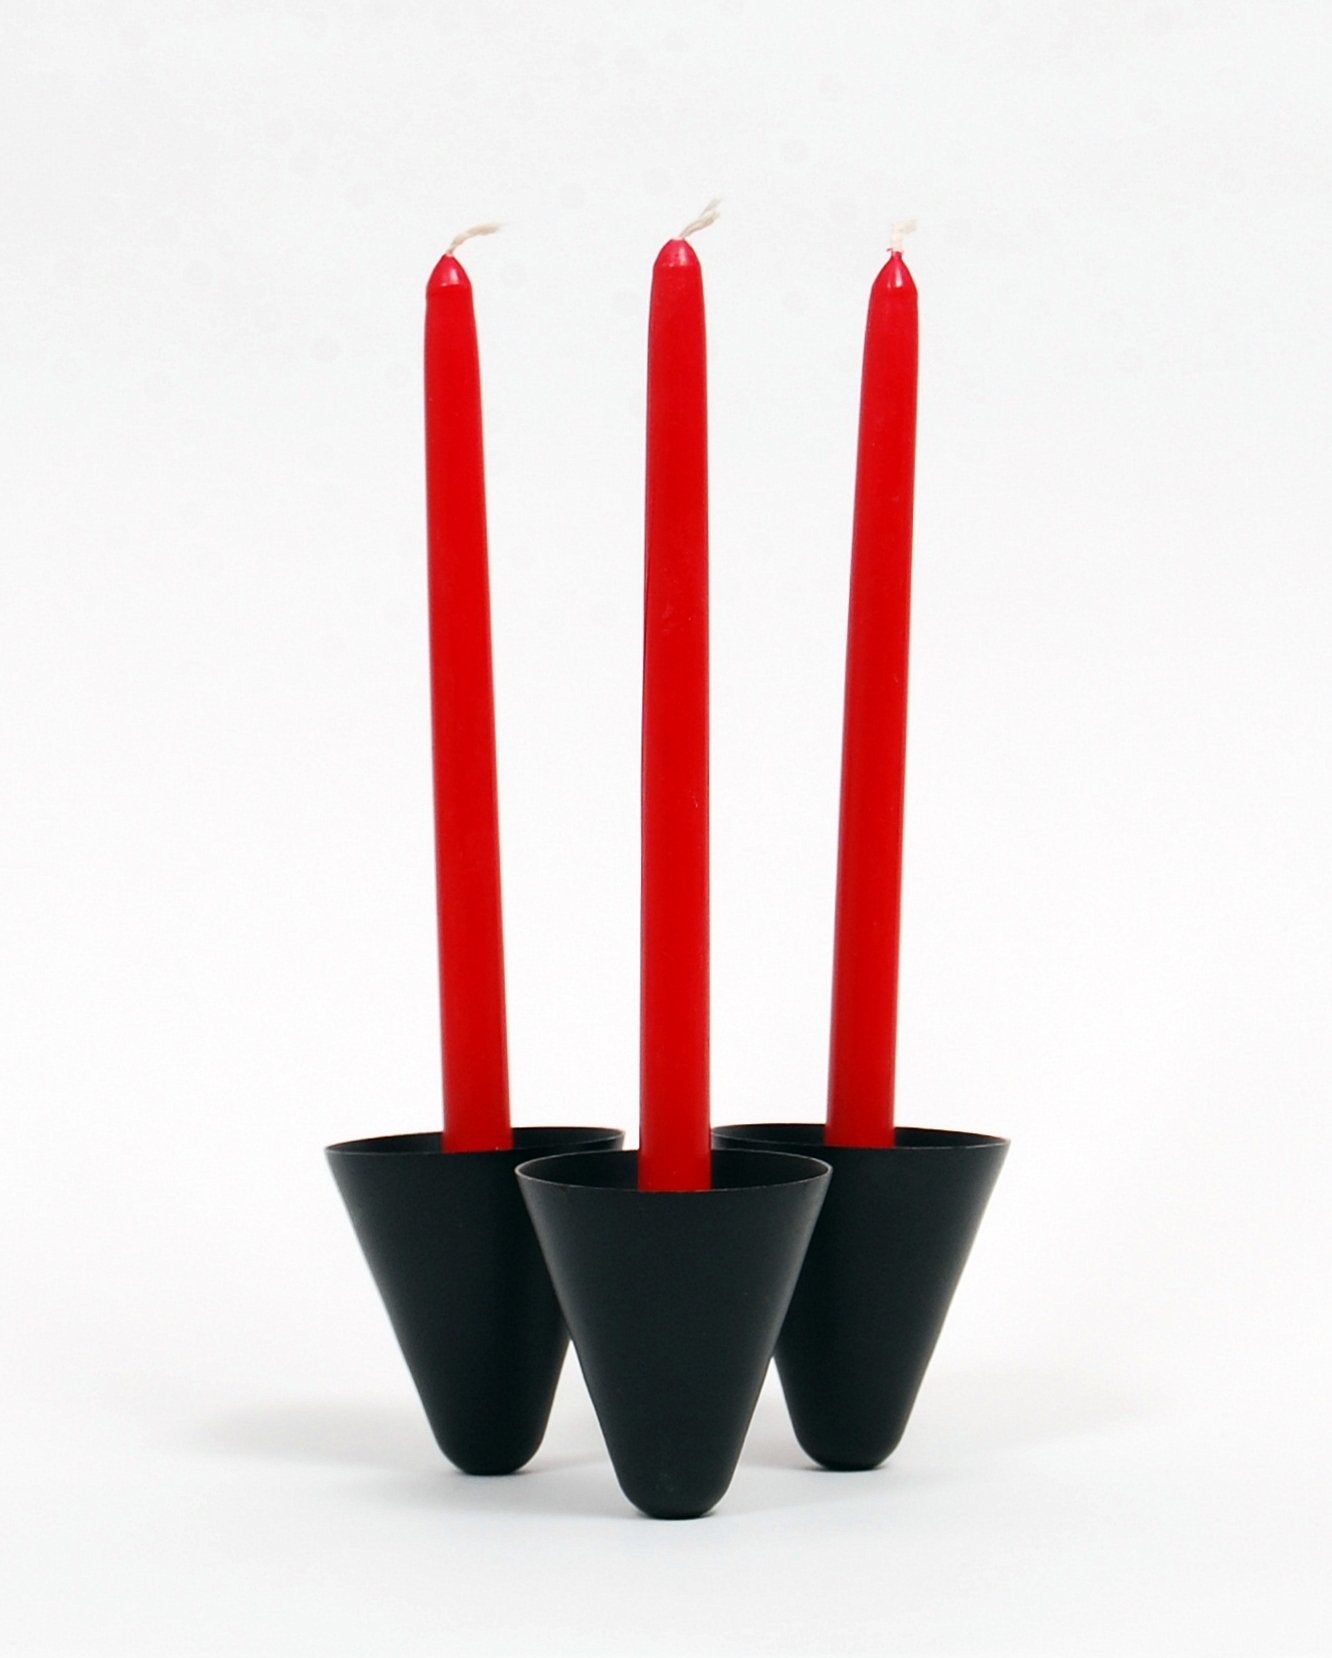 Gunnar Ander Candle Holder for Ystad Metall